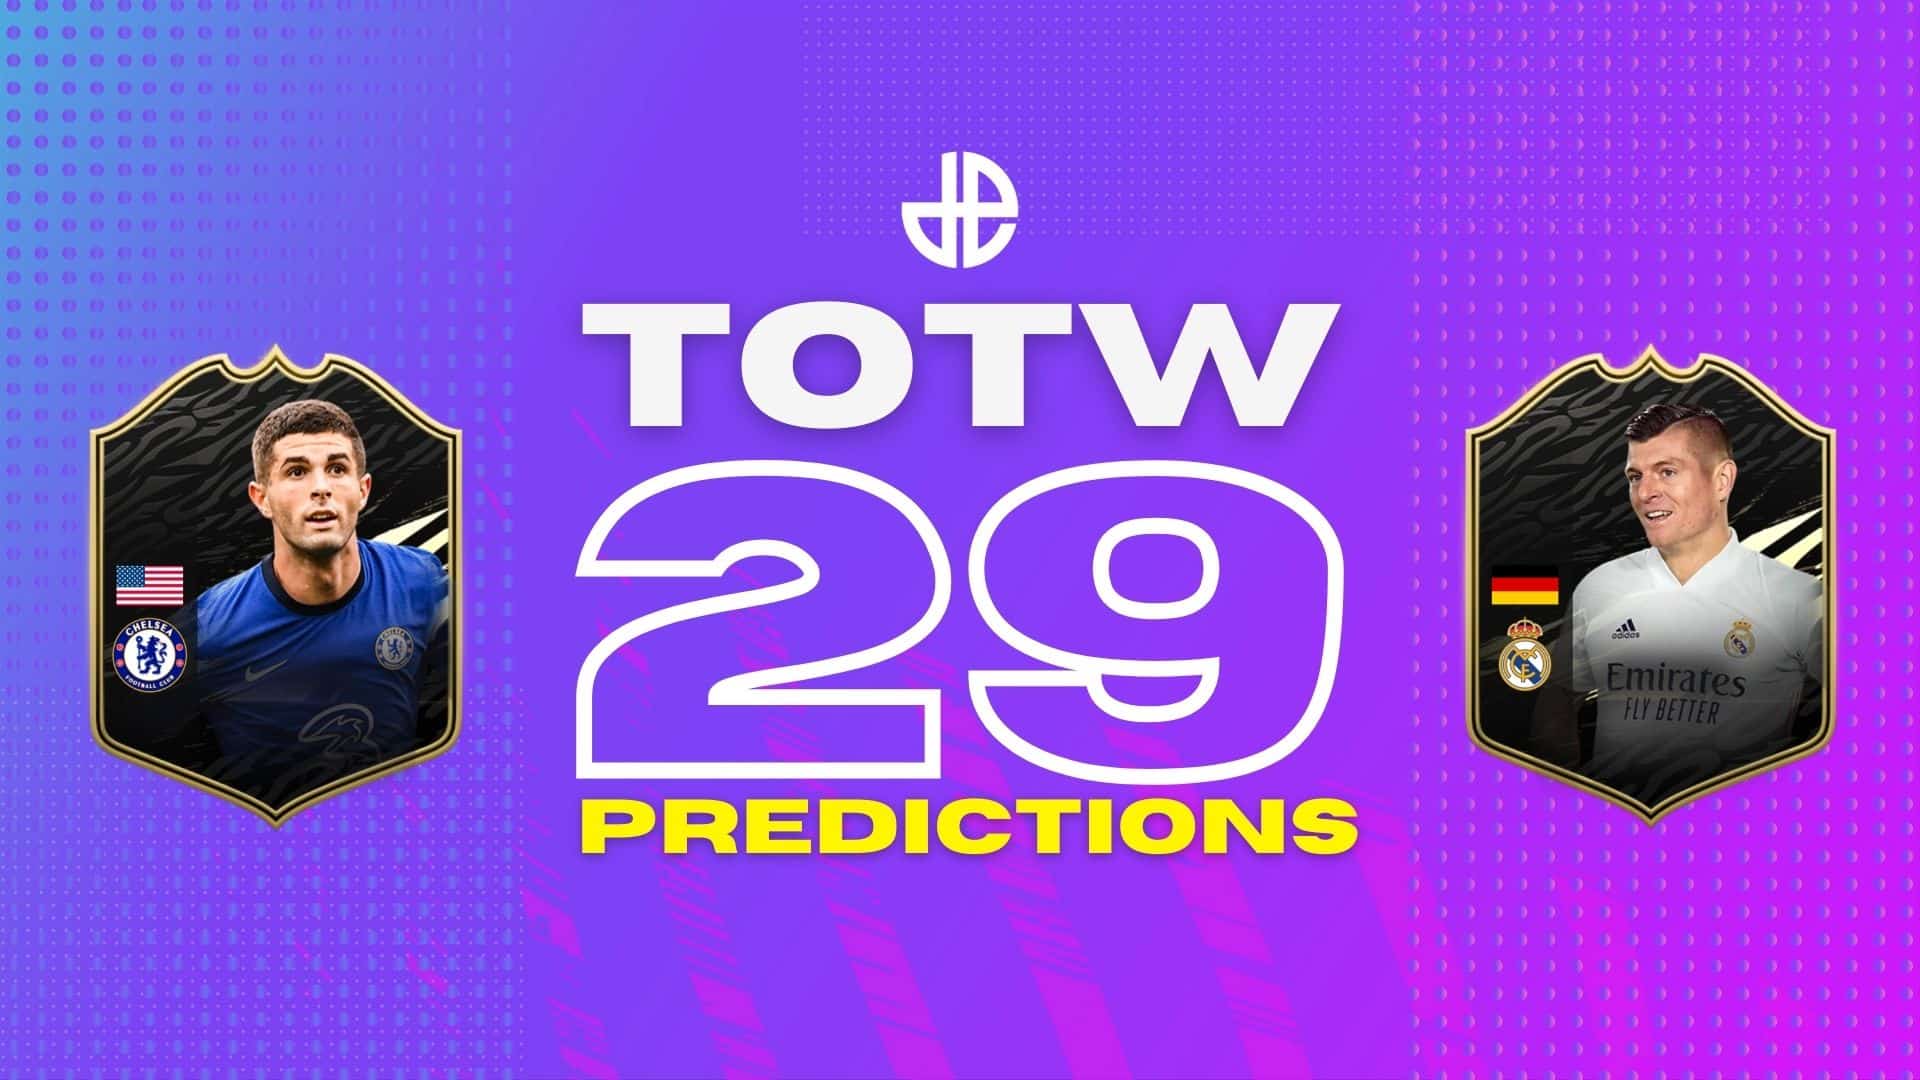 FIFA 21 TOTW 29 predictions with Pulisic and Kroos